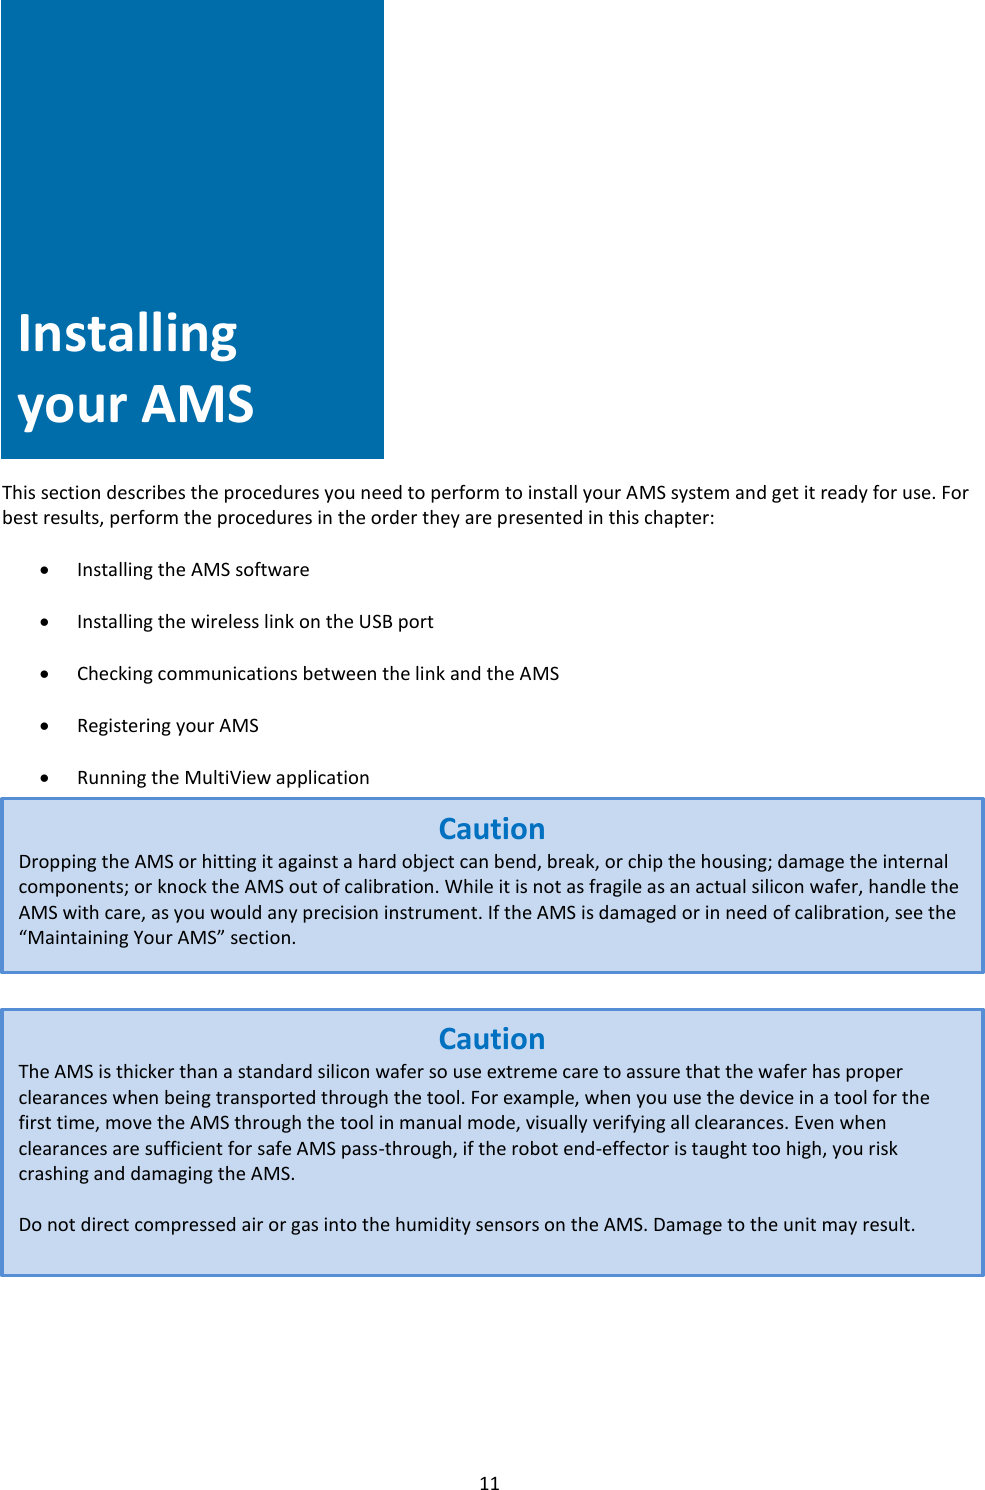   11        Installing Your AMS            This section describes the procedures you need to perform to install your AMS system and get it ready for use. For best results, perform the procedures in the order they are presented in this chapter:  • Installing the AMS software  • Installing the wireless link on the USB port  • Checking communications between the link and the AMS  • Registering your AMS  • Running the MultiView application                          Installing your AMS Caution Dropping the AMS or hitting it against a hard object can bend, break, or chip the housing; damage the internal components; or knock the AMS out of calibration. While it is not as fragile as an actual silicon wafer, handle the AMS with care, as you would any precision instrument. If the AMS is damaged or in need of calibration, see the “Maintaining Your AMS” section. Caution The AMS is thicker than a standard silicon wafer so use extreme care to assure that the wafer has proper clearances when being transported through the tool. For example, when you use the device in a tool for the first time, move the AMS through the tool in manual mode, visually verifying all clearances. Even when clearances are sufficient for safe AMS pass-through, if the robot end-effector is taught too high, you risk crashing and damaging the AMS.  Do not direct compressed air or gas into the humidity sensors on the AMS. Damage to the unit may result. 